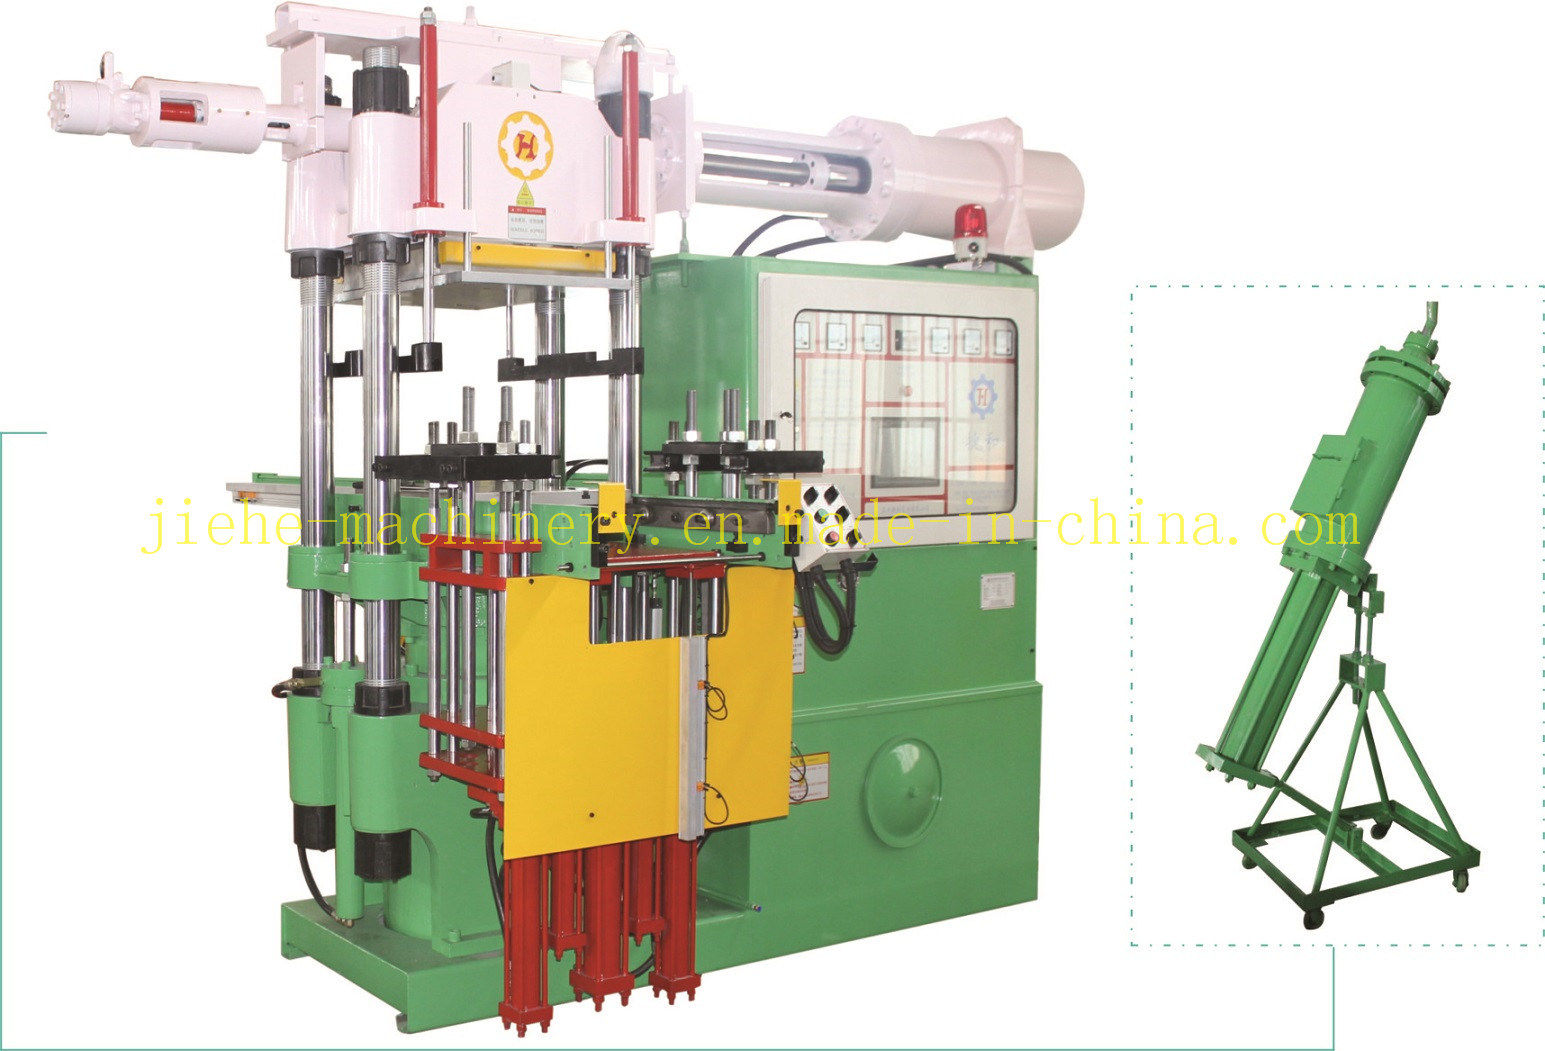 Rubber Silicone Bellow Injection Moulding Press